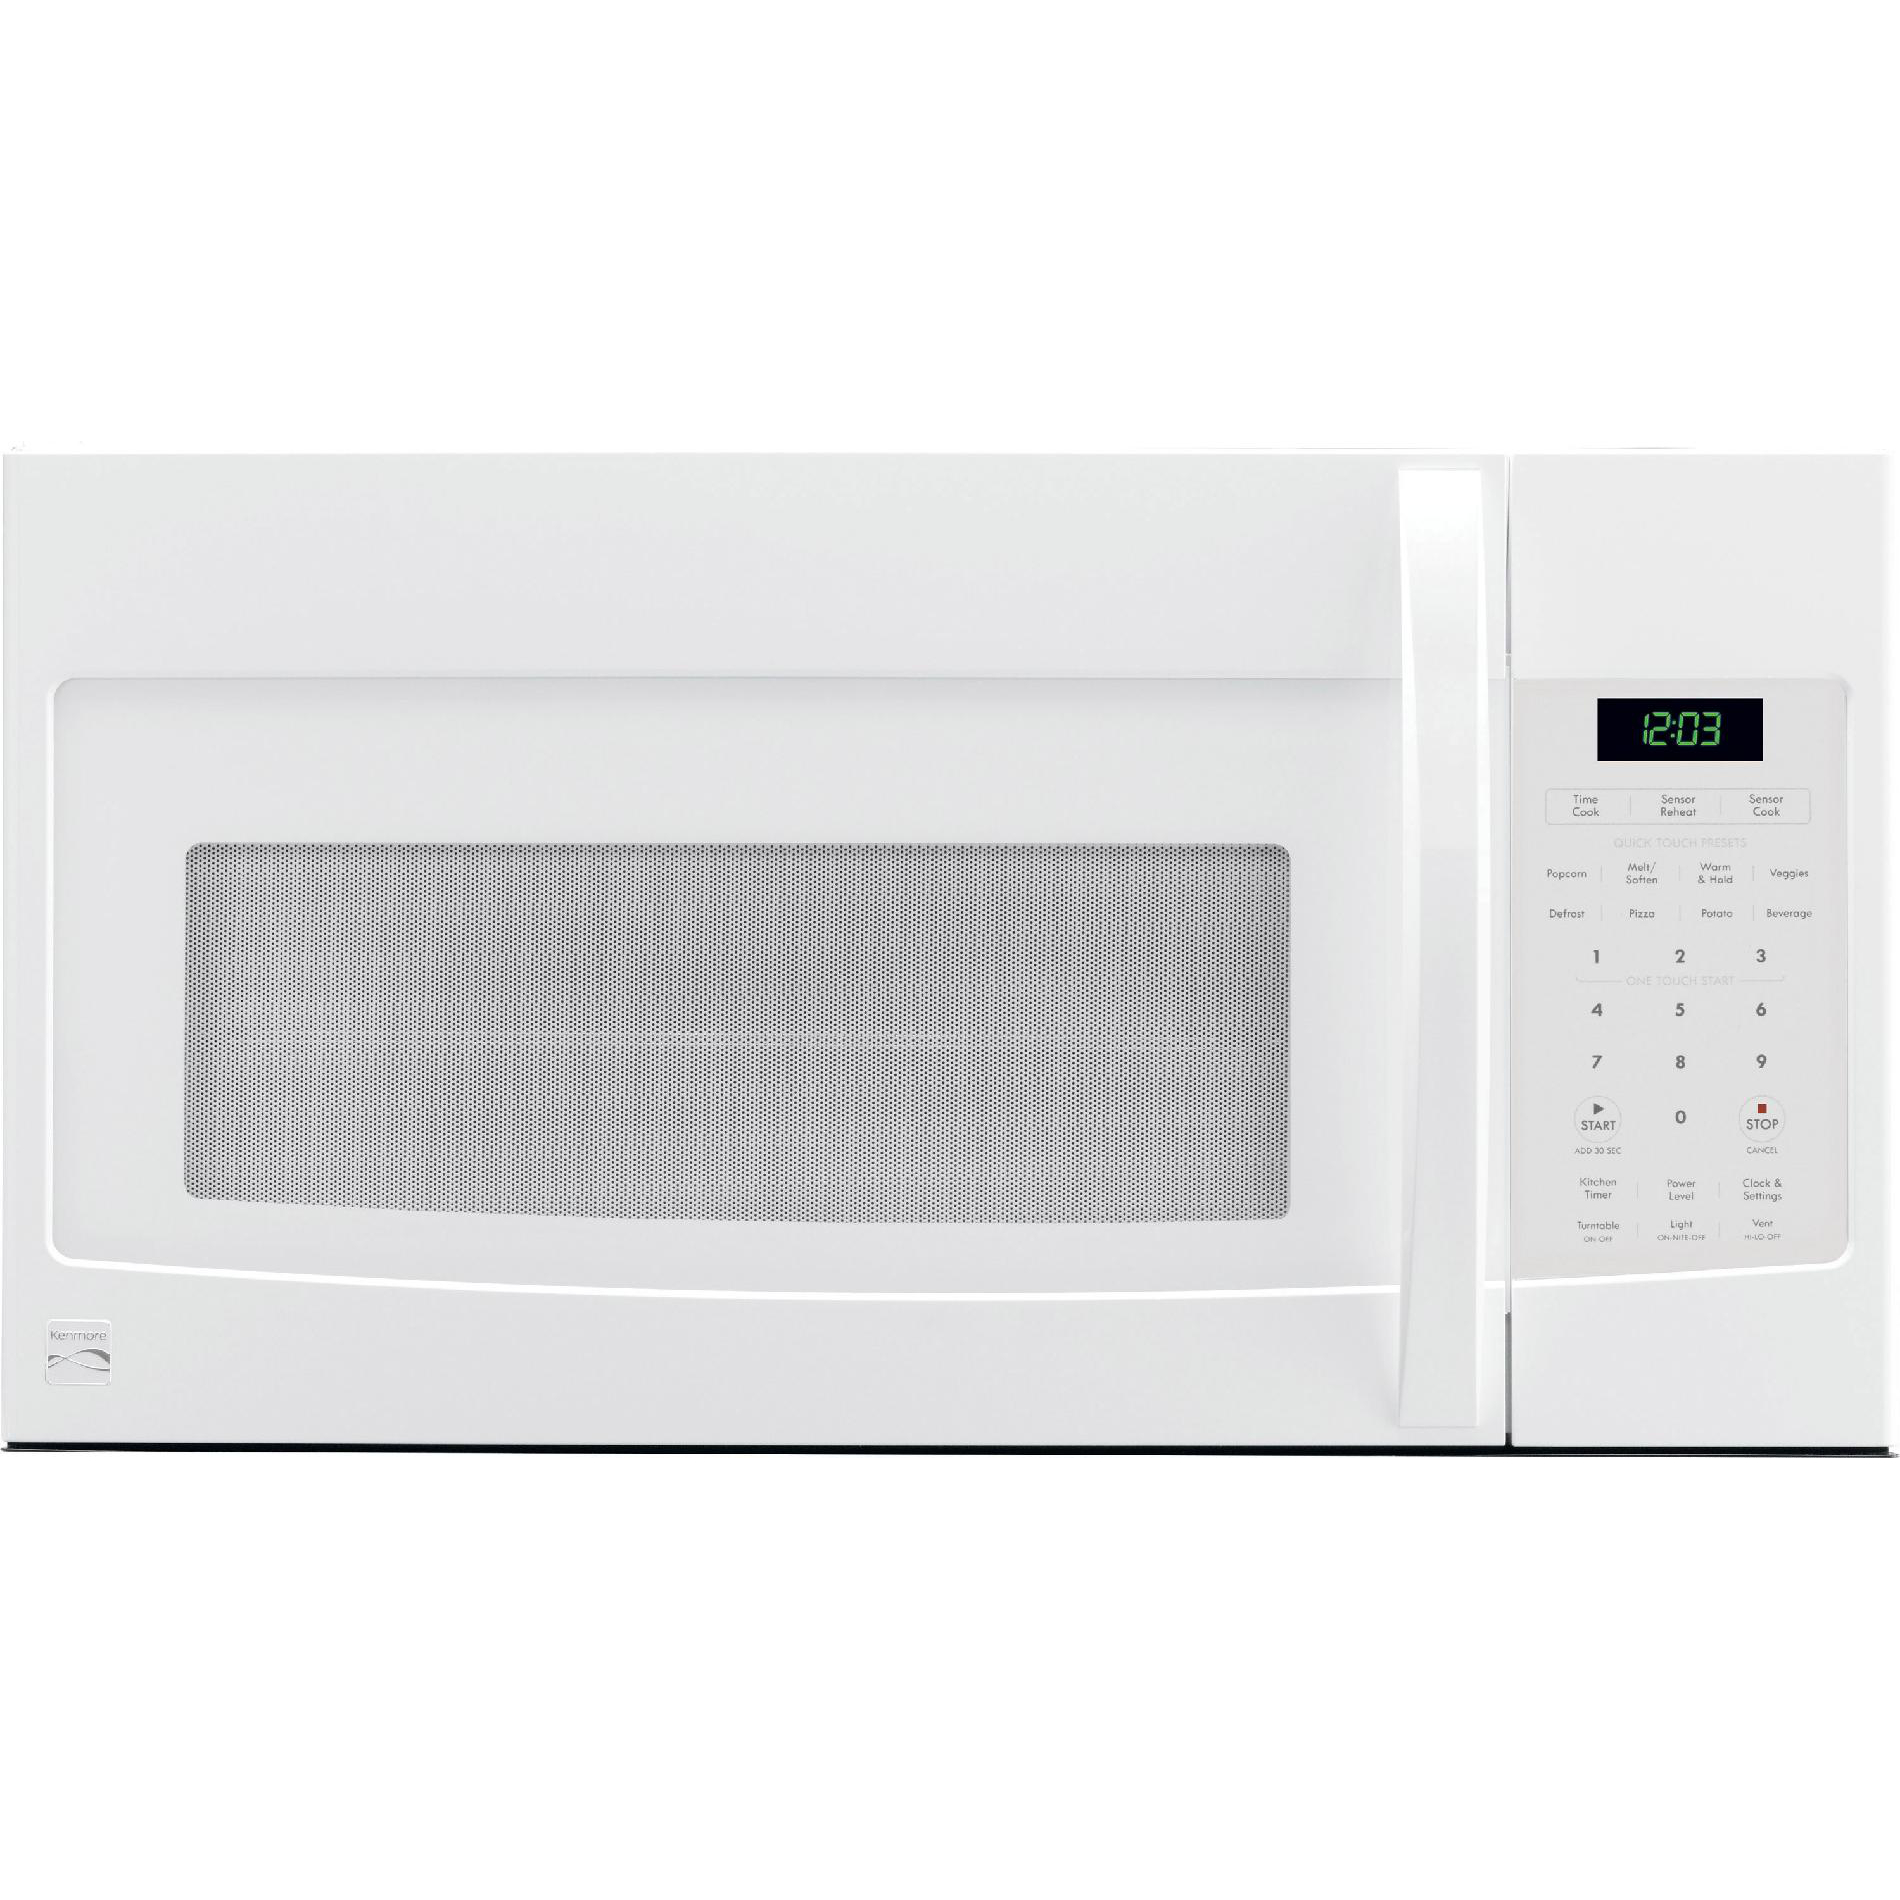 Kenmore 80342 1.7 cu. ft. Over-the-Range Microwave - White